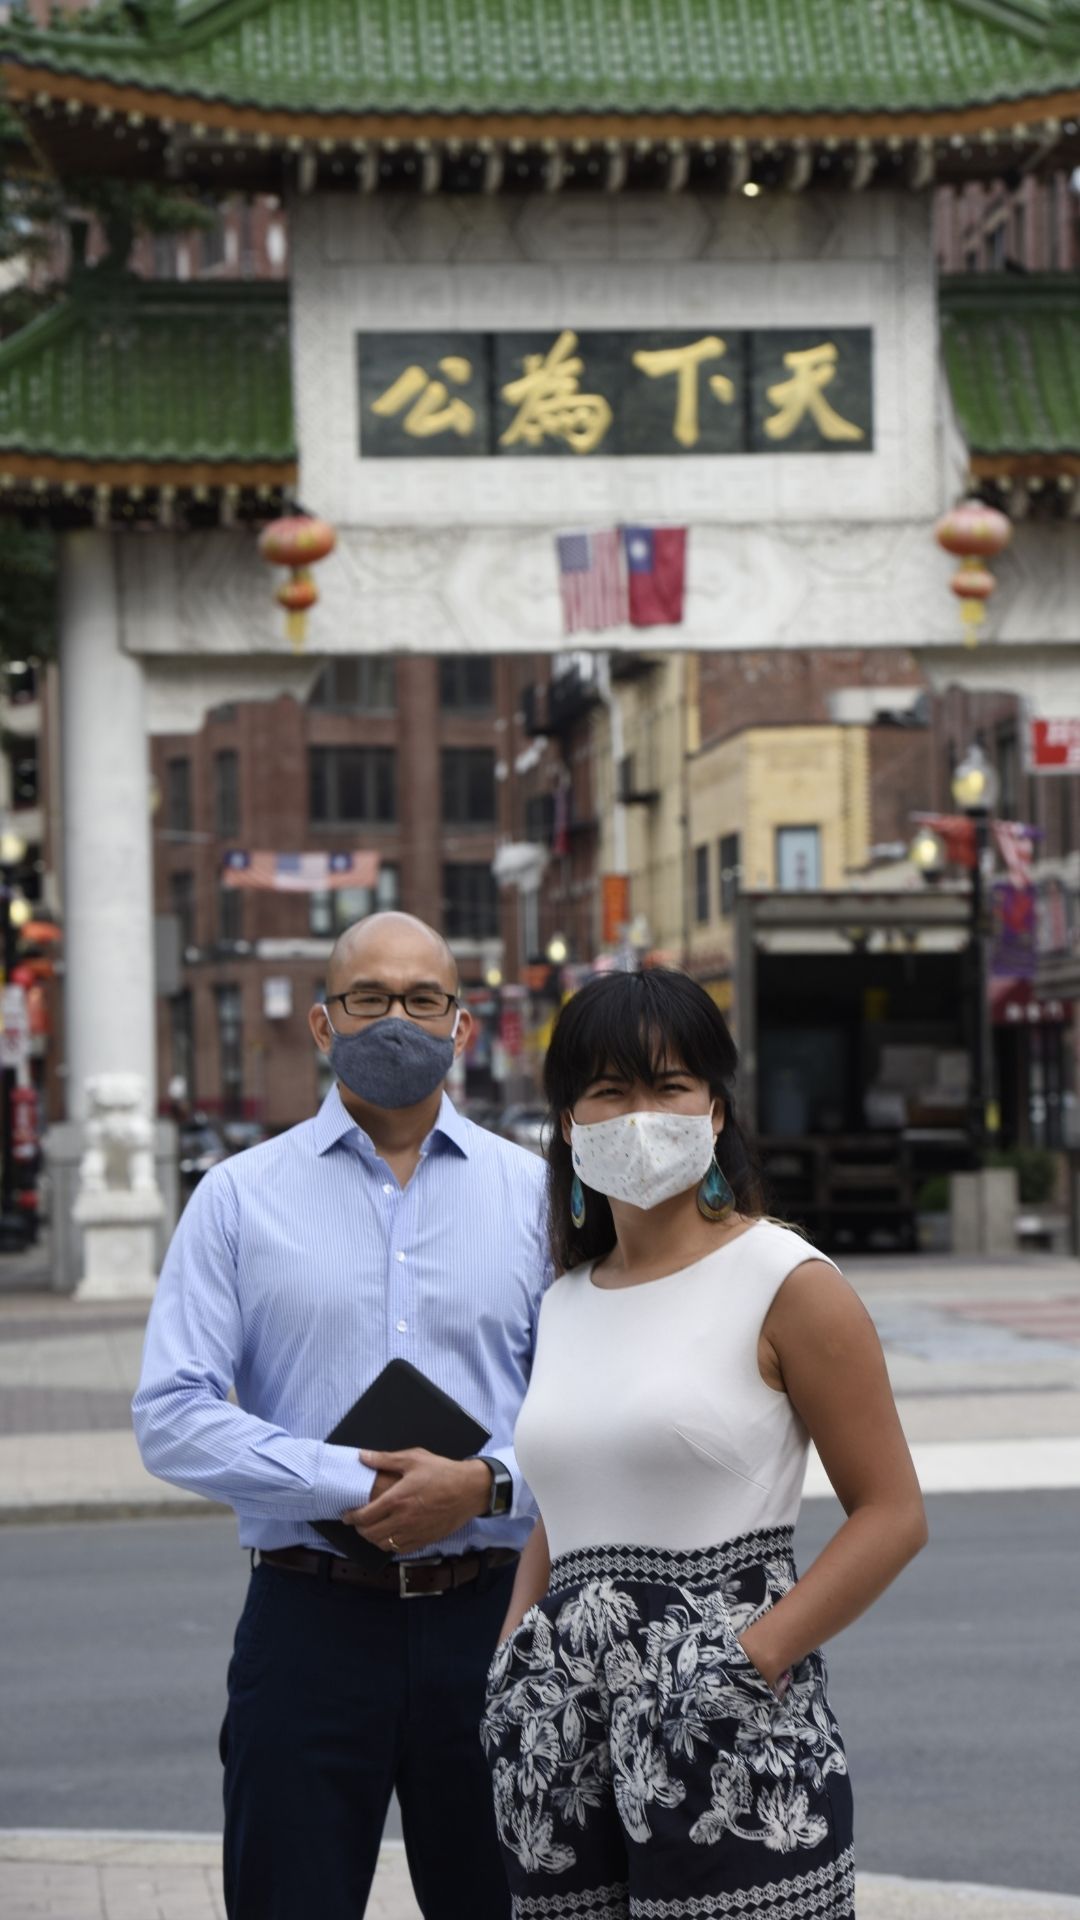 Ben Hires and Yanyi Weng standing next to each other in Chinatown. They're standing in front of and across the street from a green and white Chinese architecture-styled structure with a green and gold sign with Chinese characters on it. Behind the structure are city buildings. Yanyi is wearing a black and white sleeveless dress. Ben is wearing a light blue collared shirt and black pants.